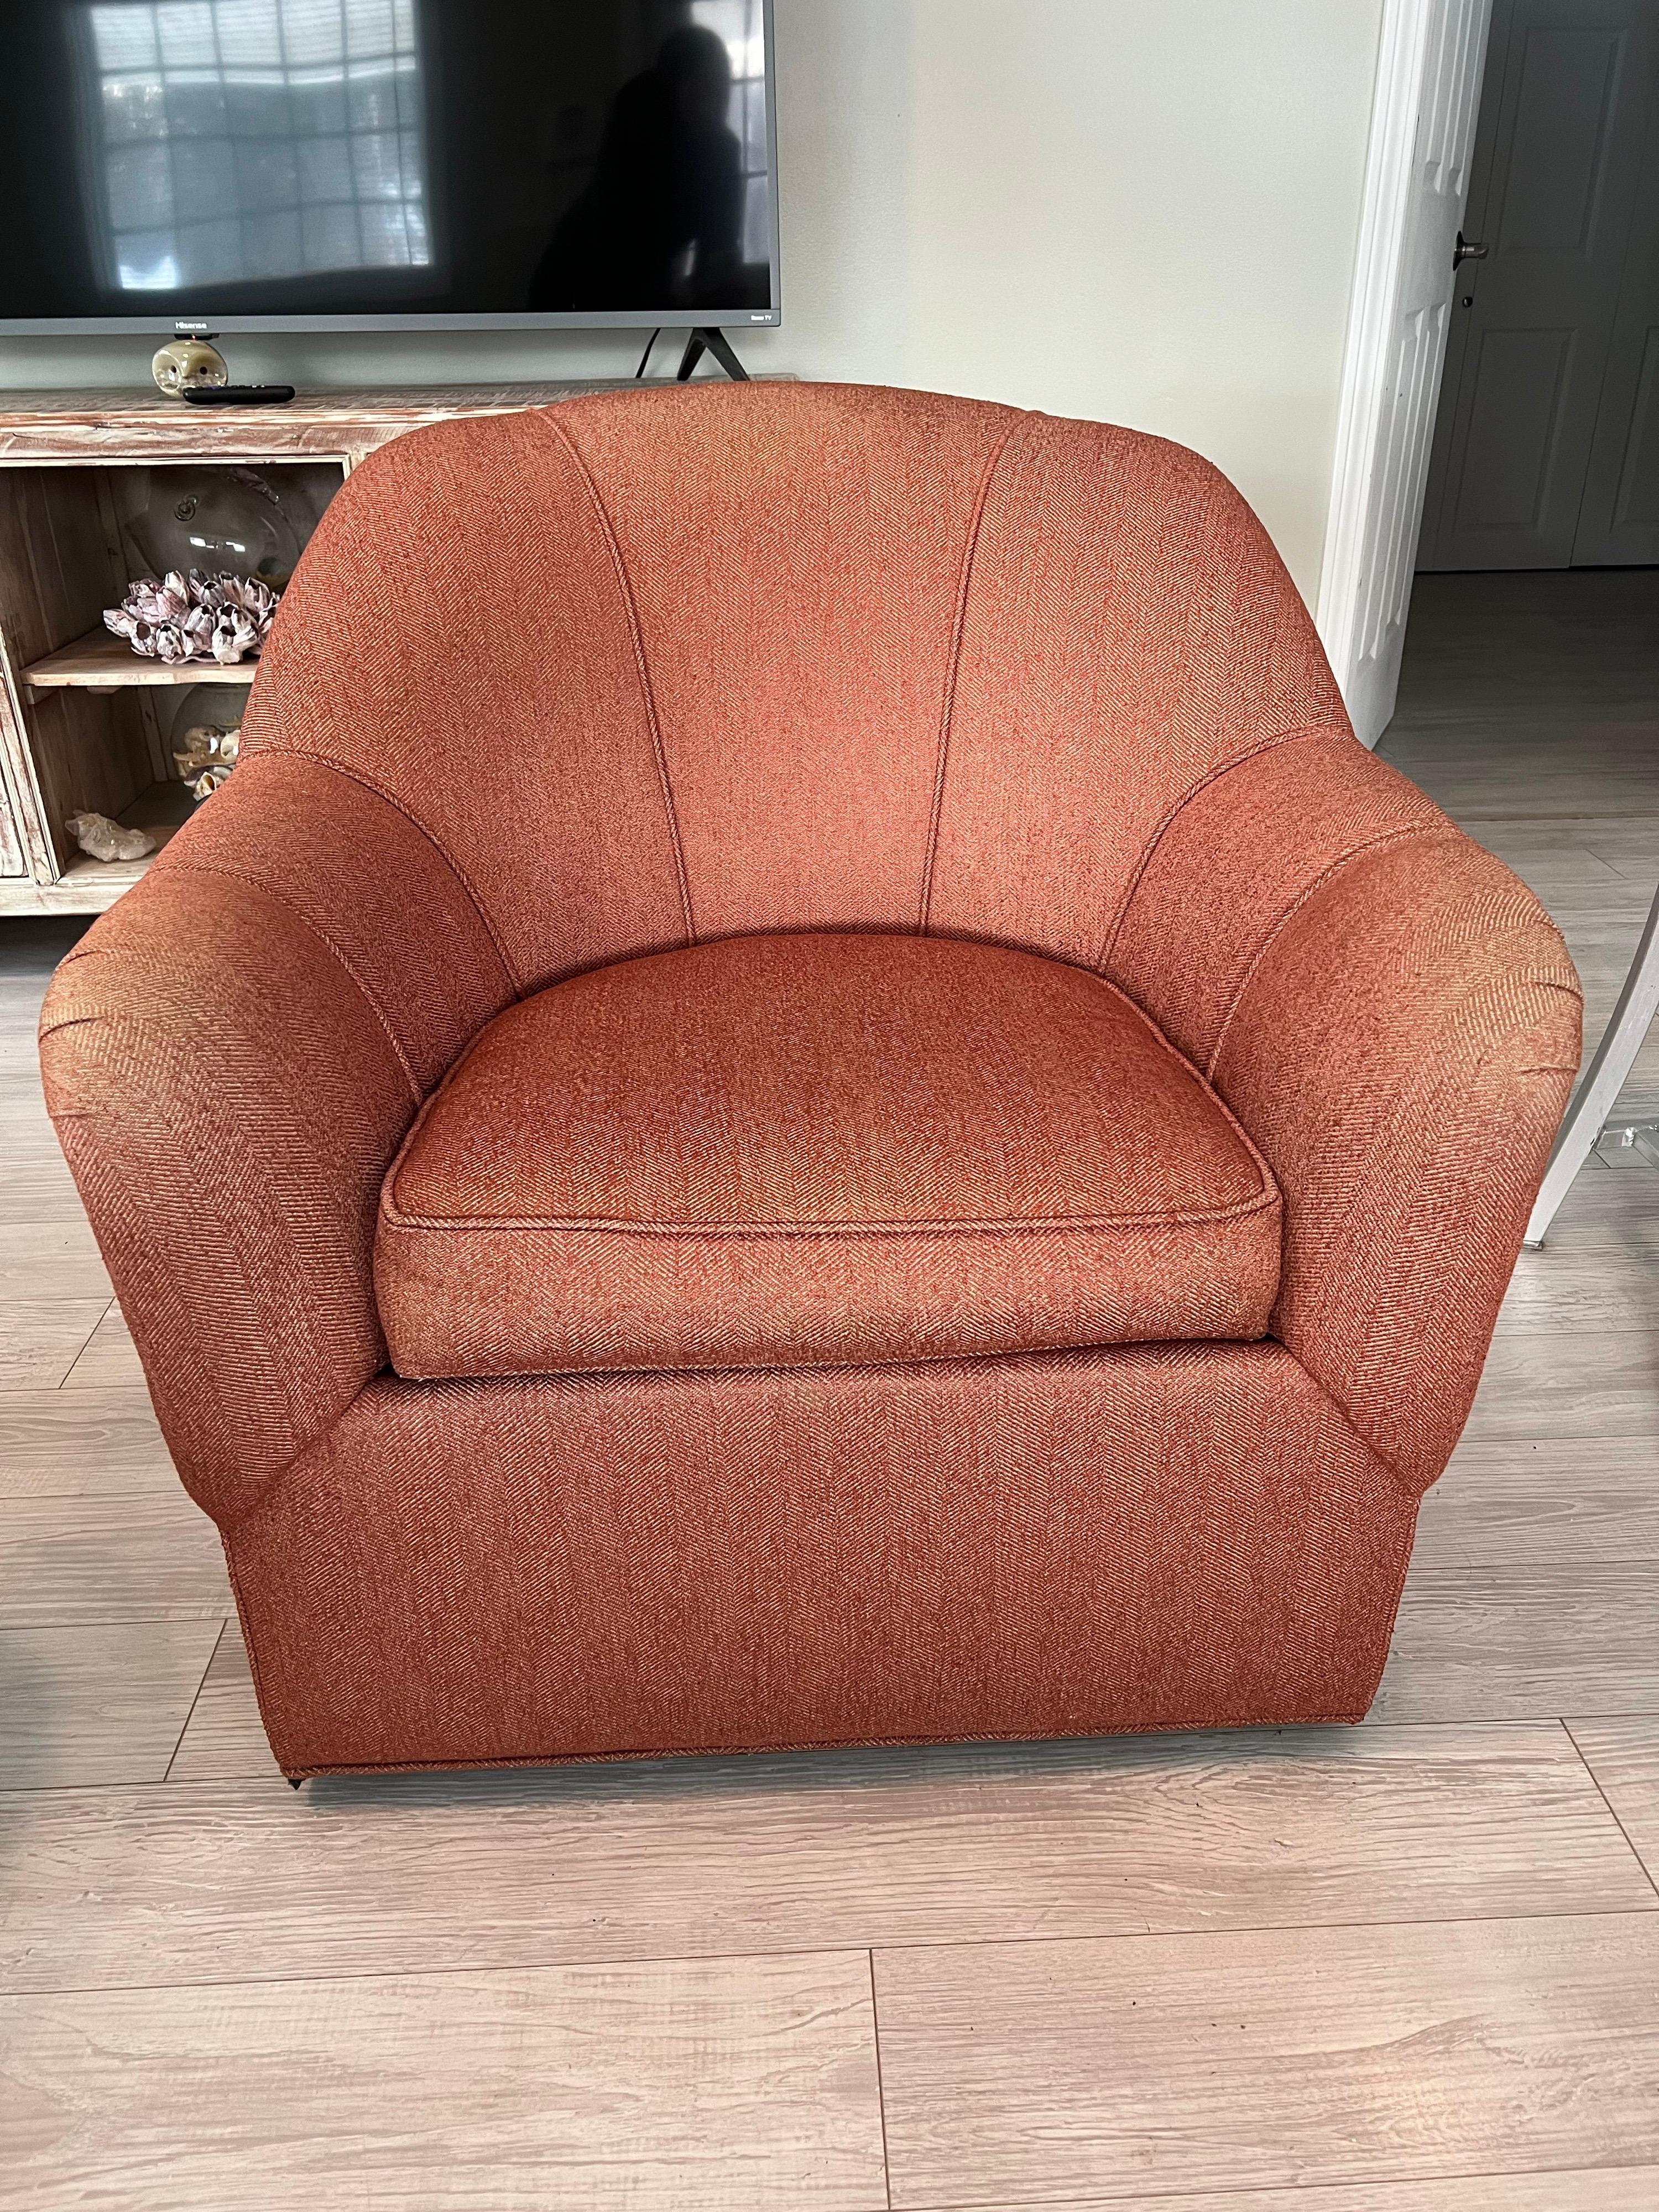 Amazing bones to this beauty. Solid construction and timeless lines to this perfectly designed swivel chair. Some fading to upholstery. Comes with upholstered arm covers. Nice larger size for that taller, bigger person.